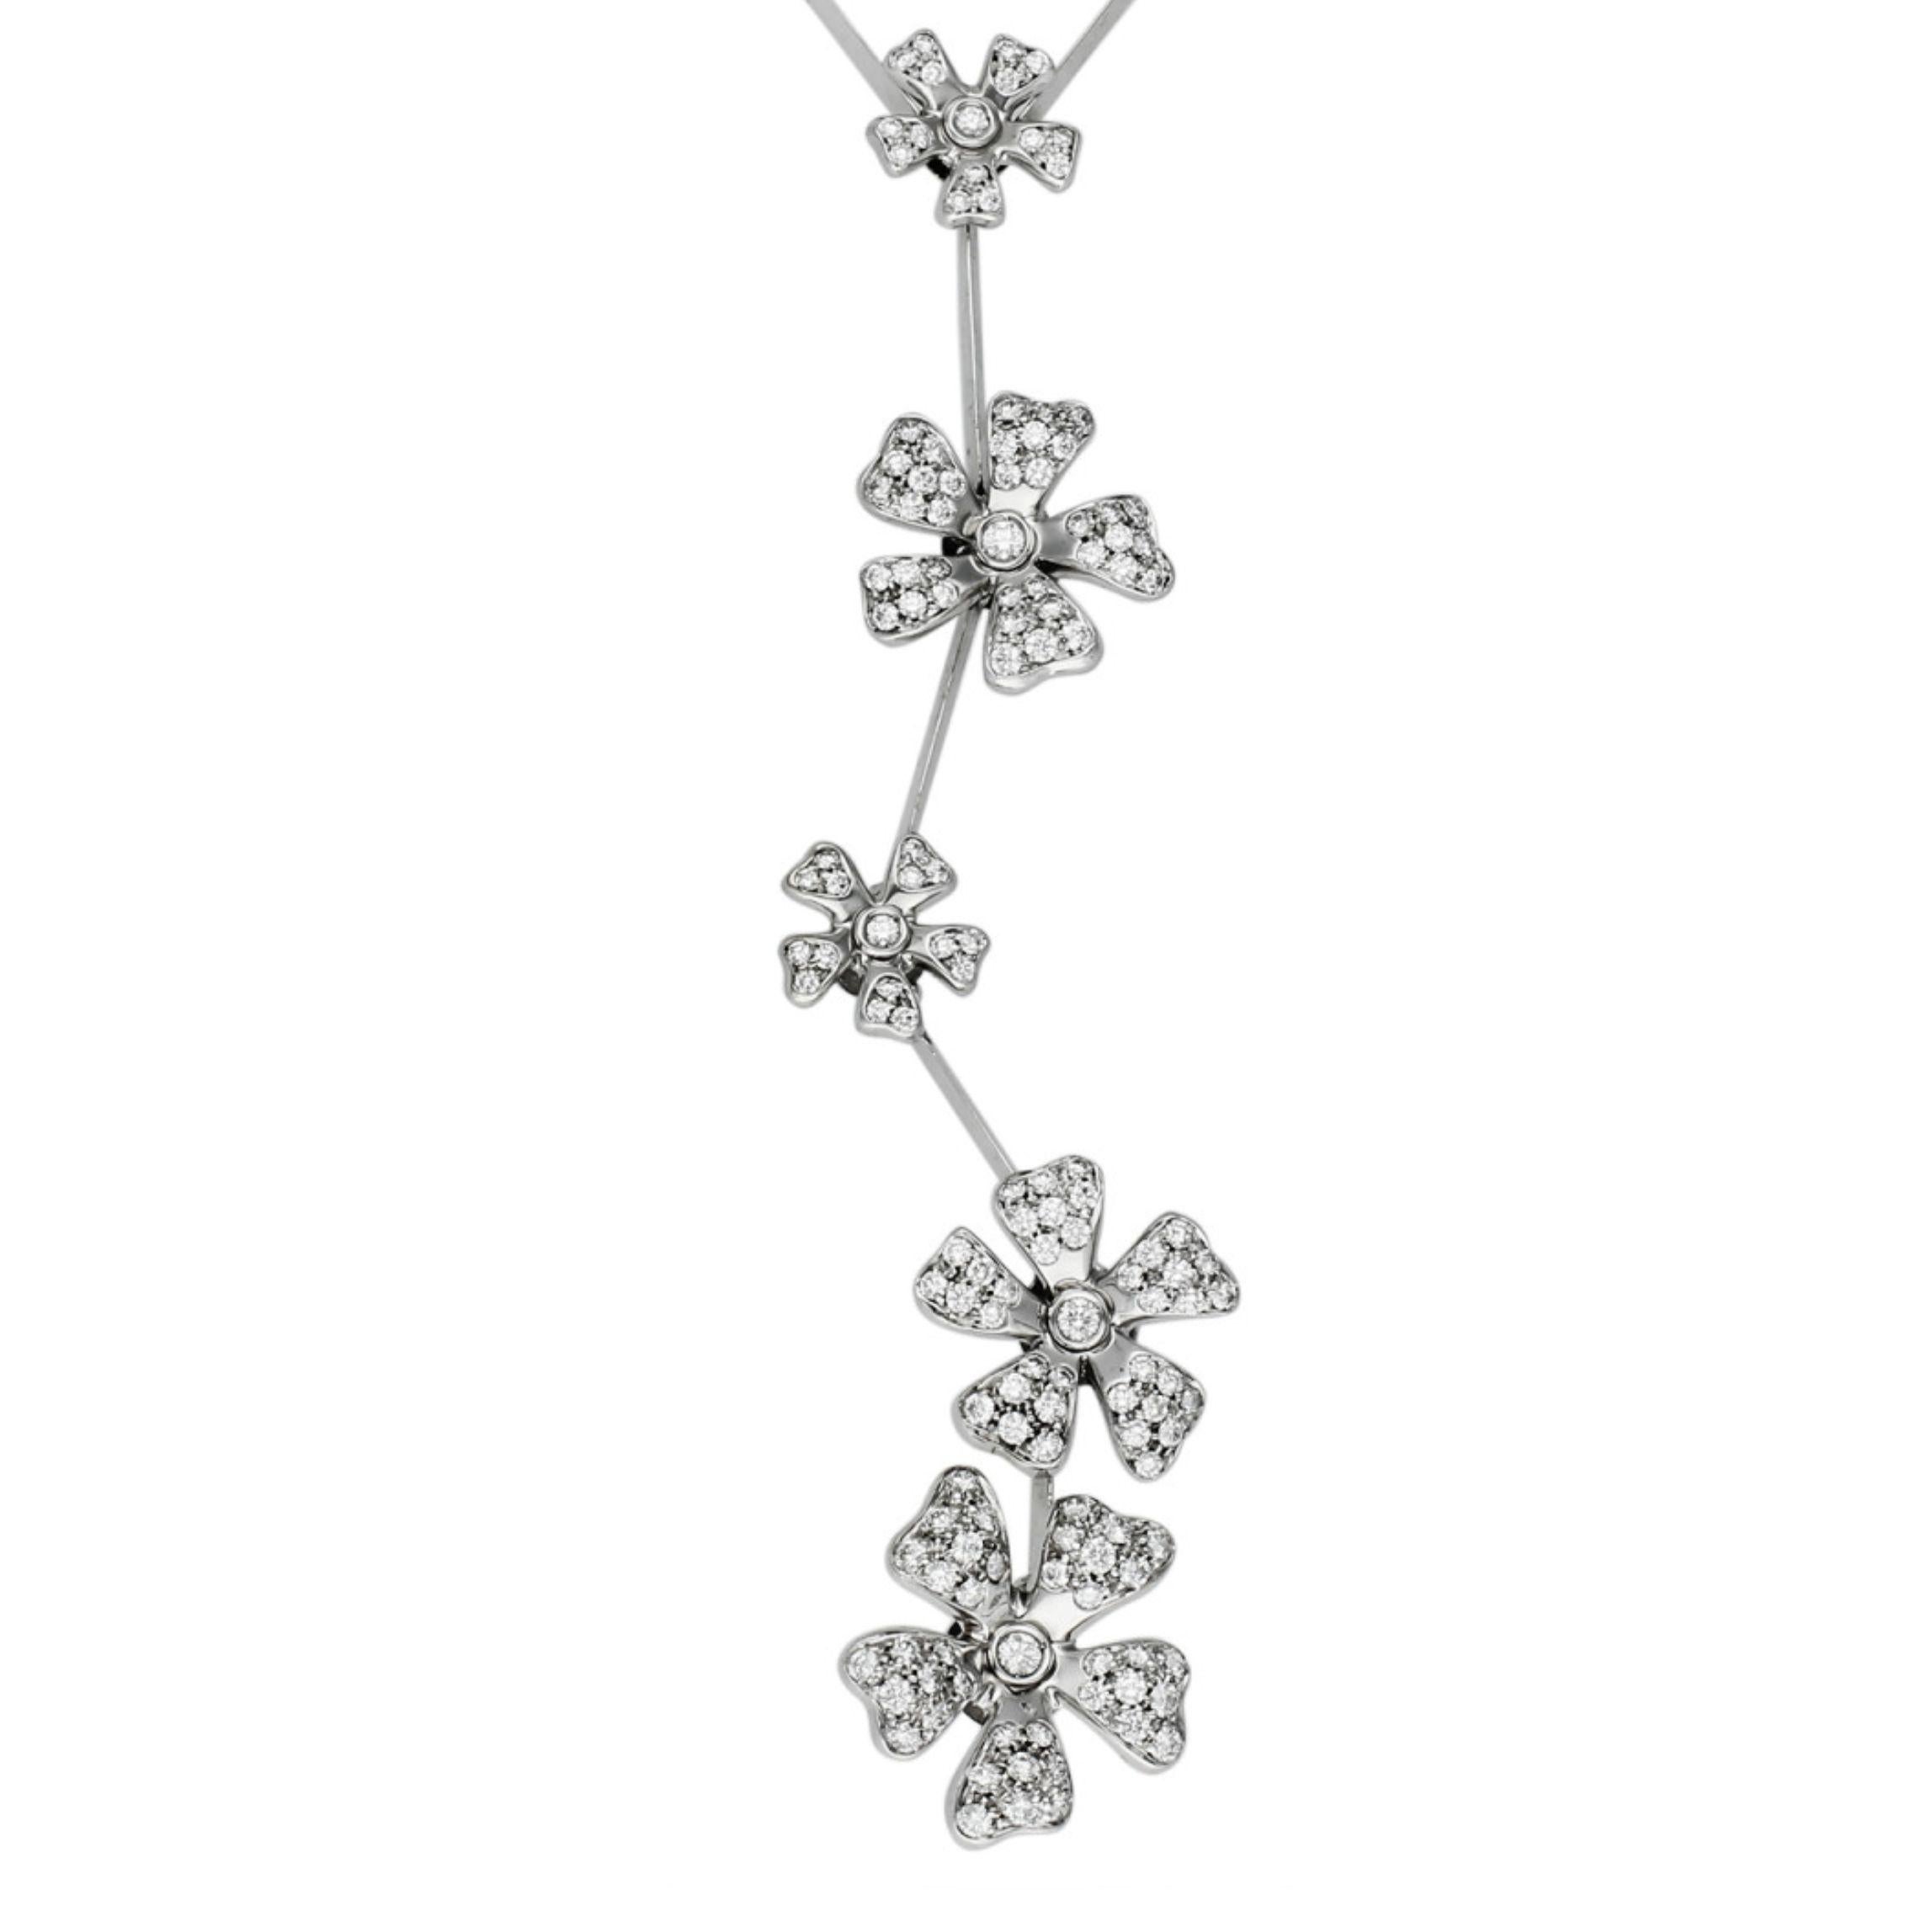 This Pre-Loved De Beers Wild Flower Necklace is an exquisite piece with an enchanting allure. A symphony of luxury and nature, featuring a cascade of meticulously crafted diamond-encrusted flowers suspended delicately along a refined bar link chain.